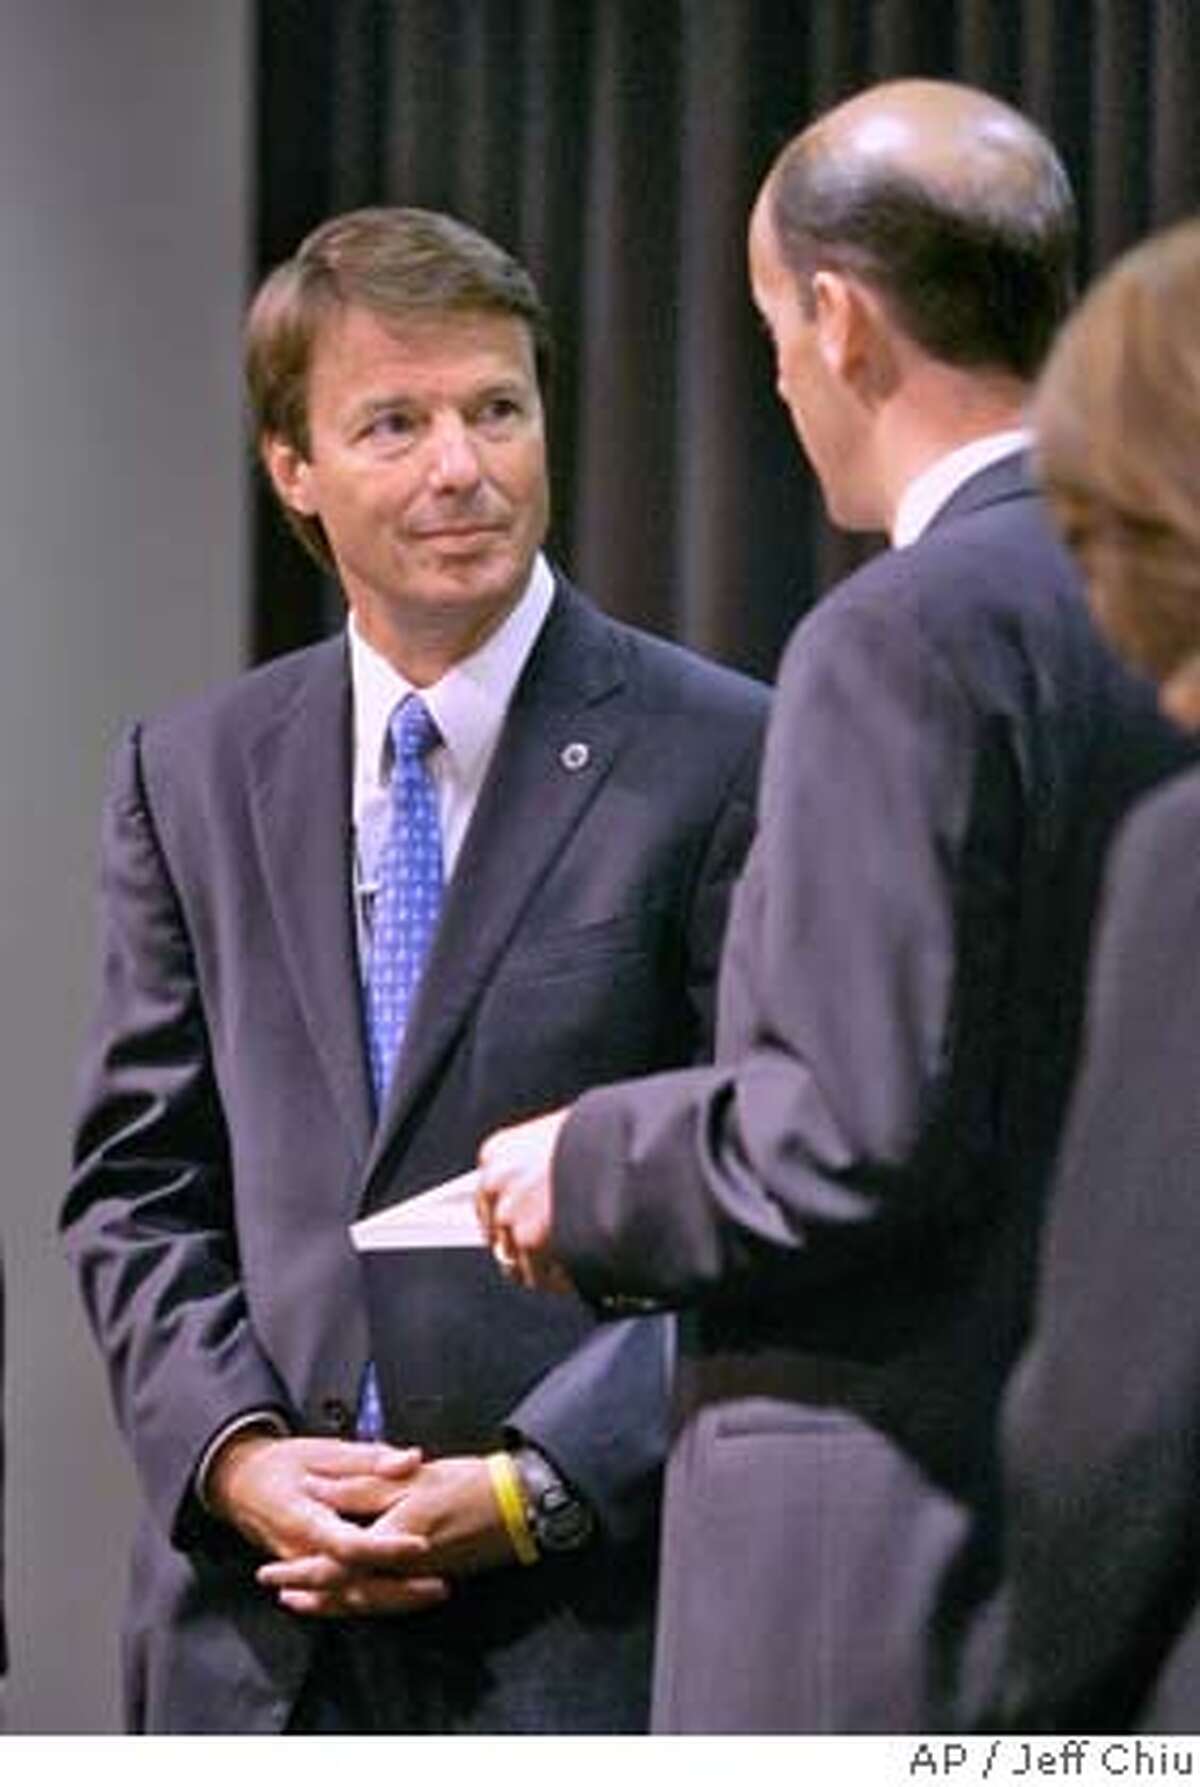 Democratic presidential hopeful John Edwards, left, speaks to members of the Silicon Valley Leadership Group on Wednesday, Aug. 1, 2007, in Santa Clara, Calif. (AP Photo/Jeff Chiu)